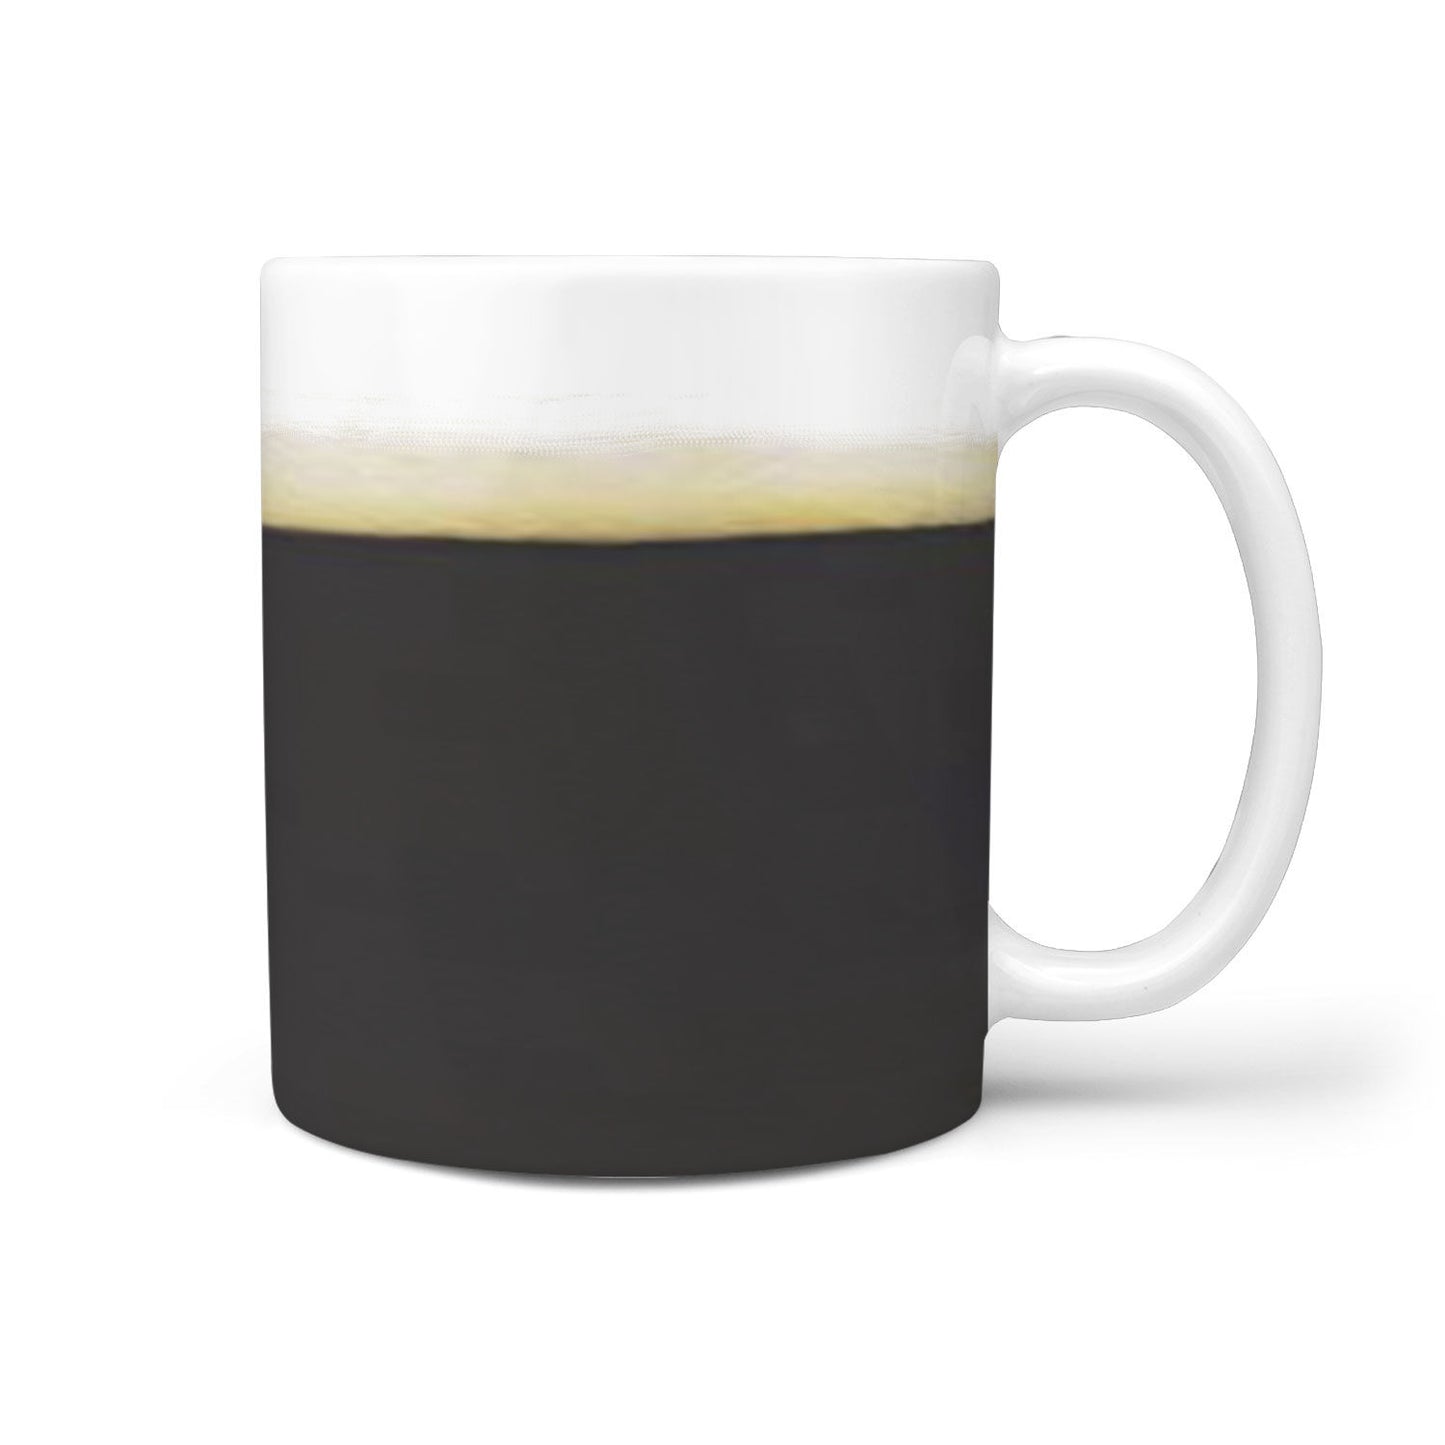 THE BREW MUGiT